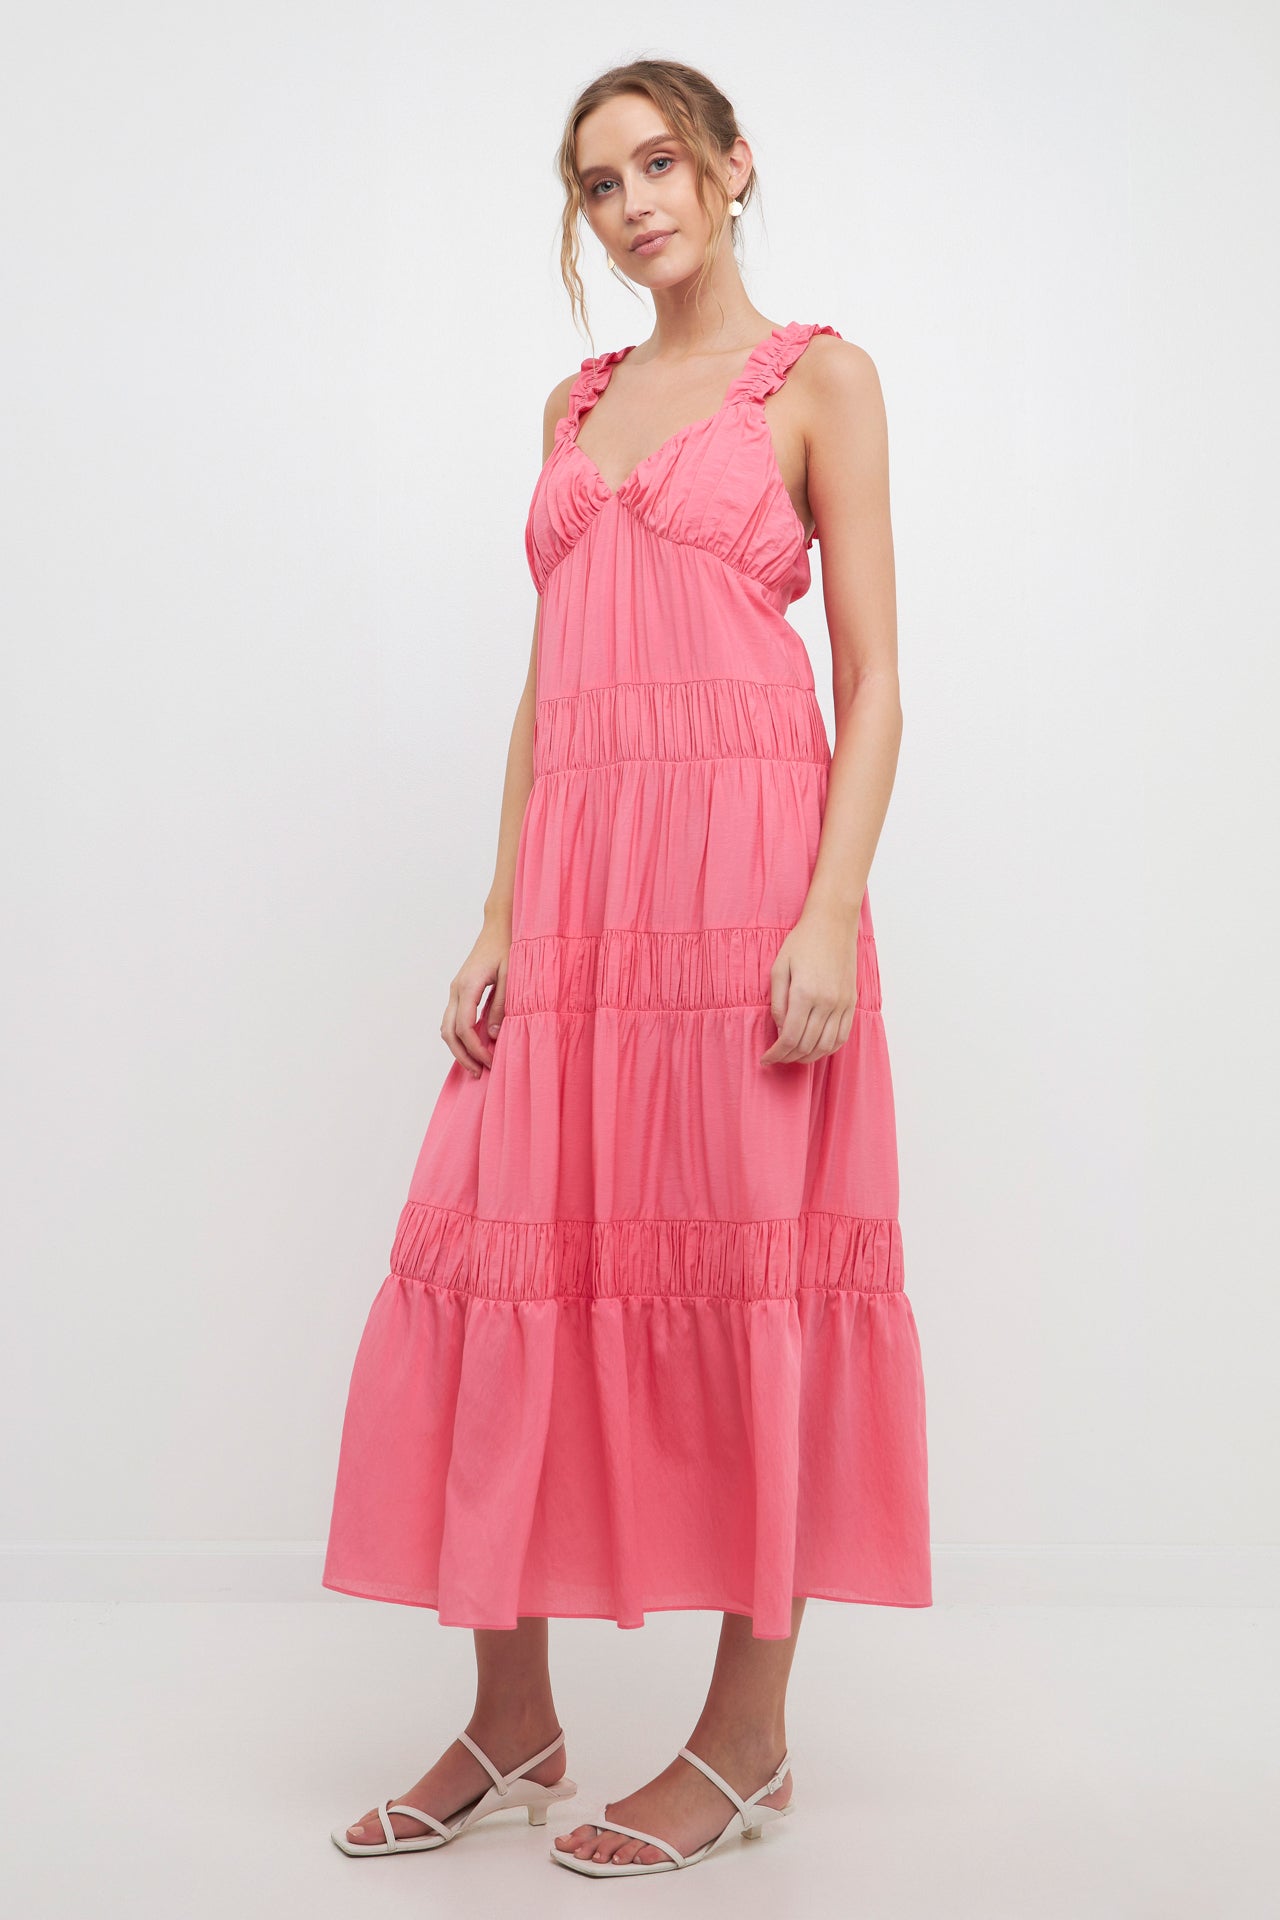 FREE THE ROSES - Ruched Layered Sweetheart Maxi Dress - DRESSES available at Objectrare